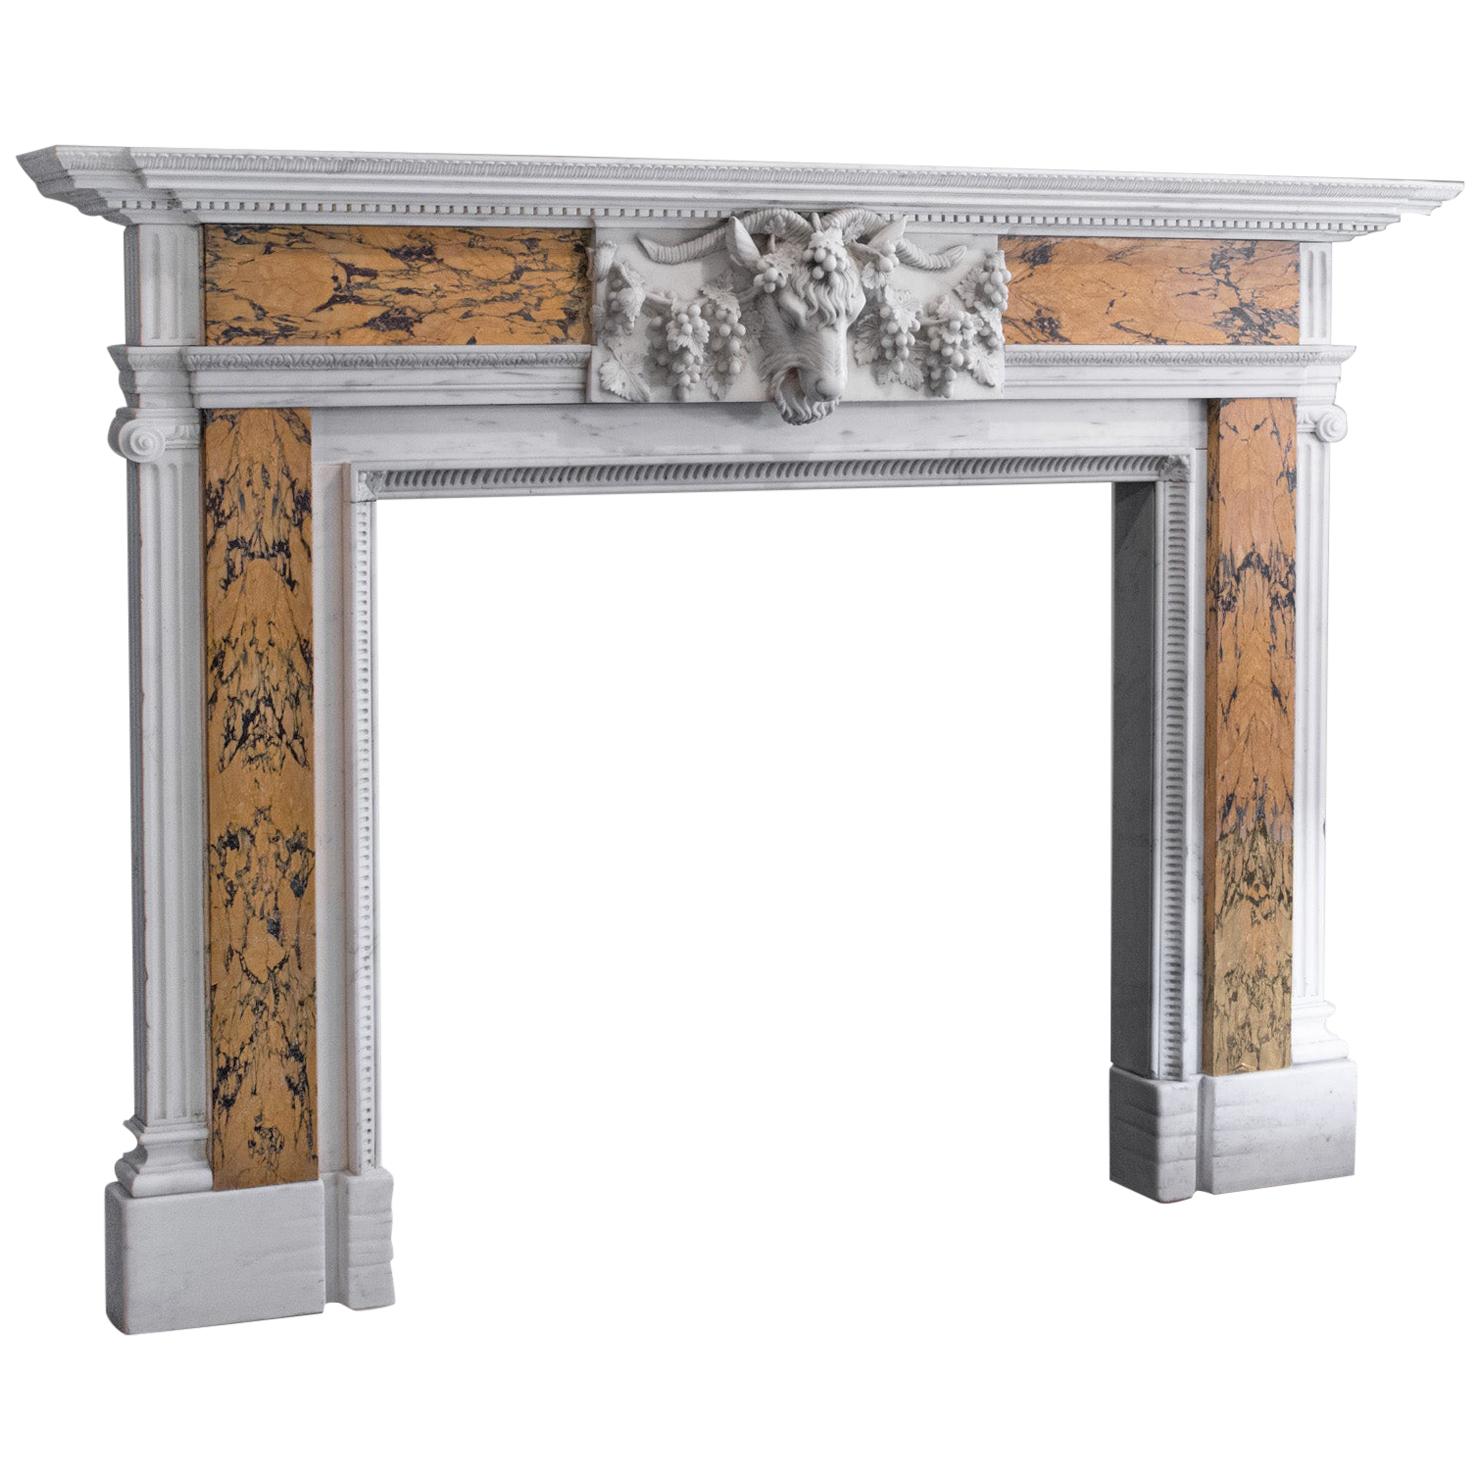 Georgian Revival Marble Fireplace, English, Fire Surround, Dominic Hurley